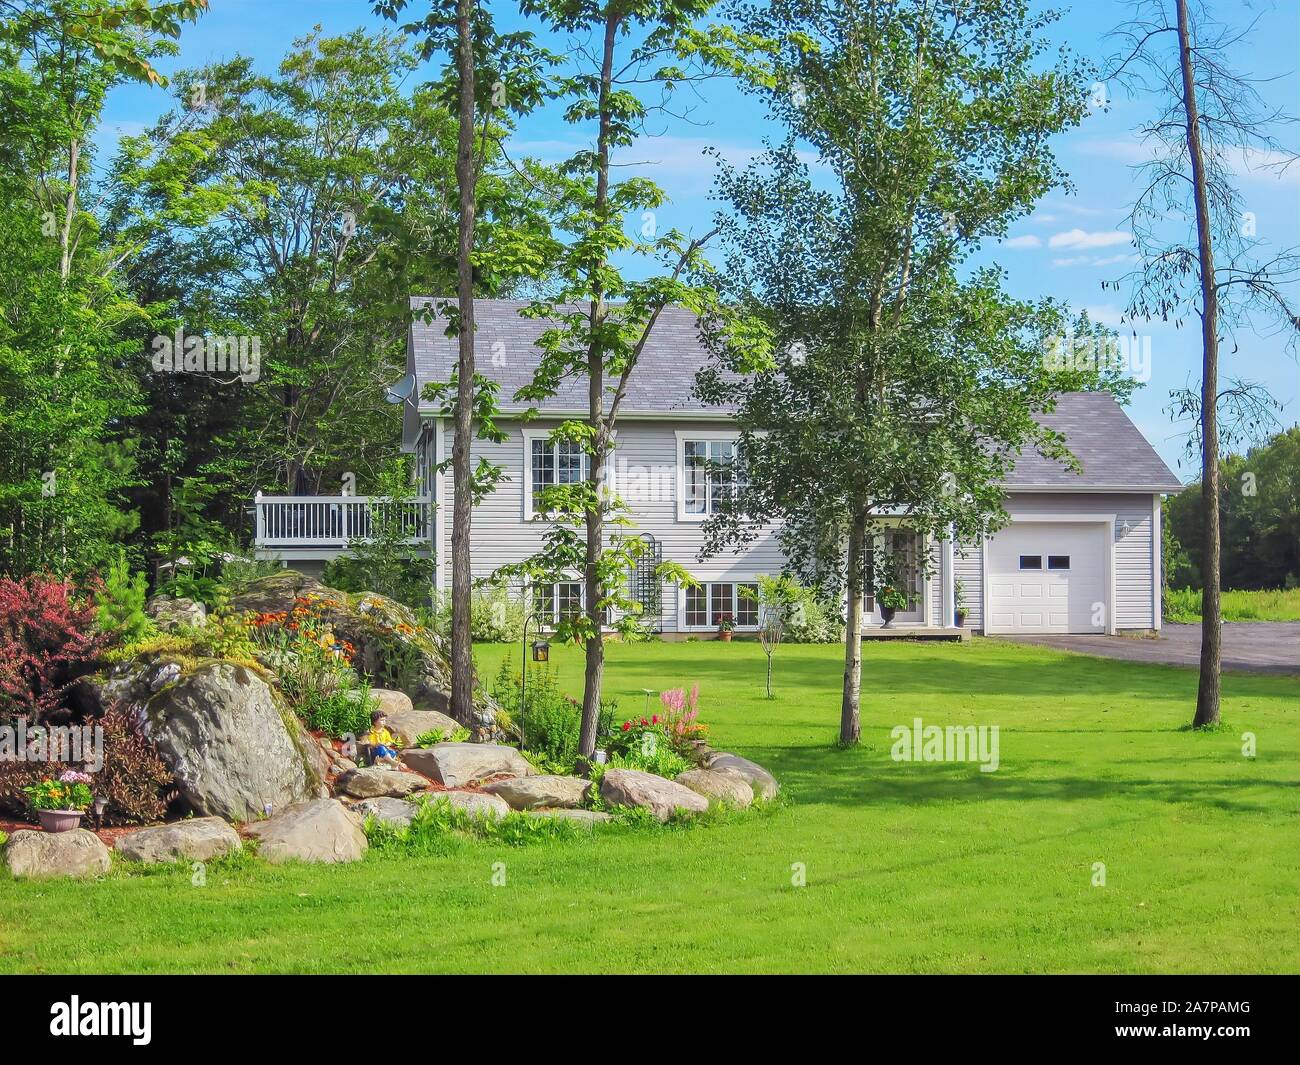 Street view of a picturesque country home with a large landscaped front yard in a forested rural area in the Eastern Townships of Quebec, Canada. Stock Photo